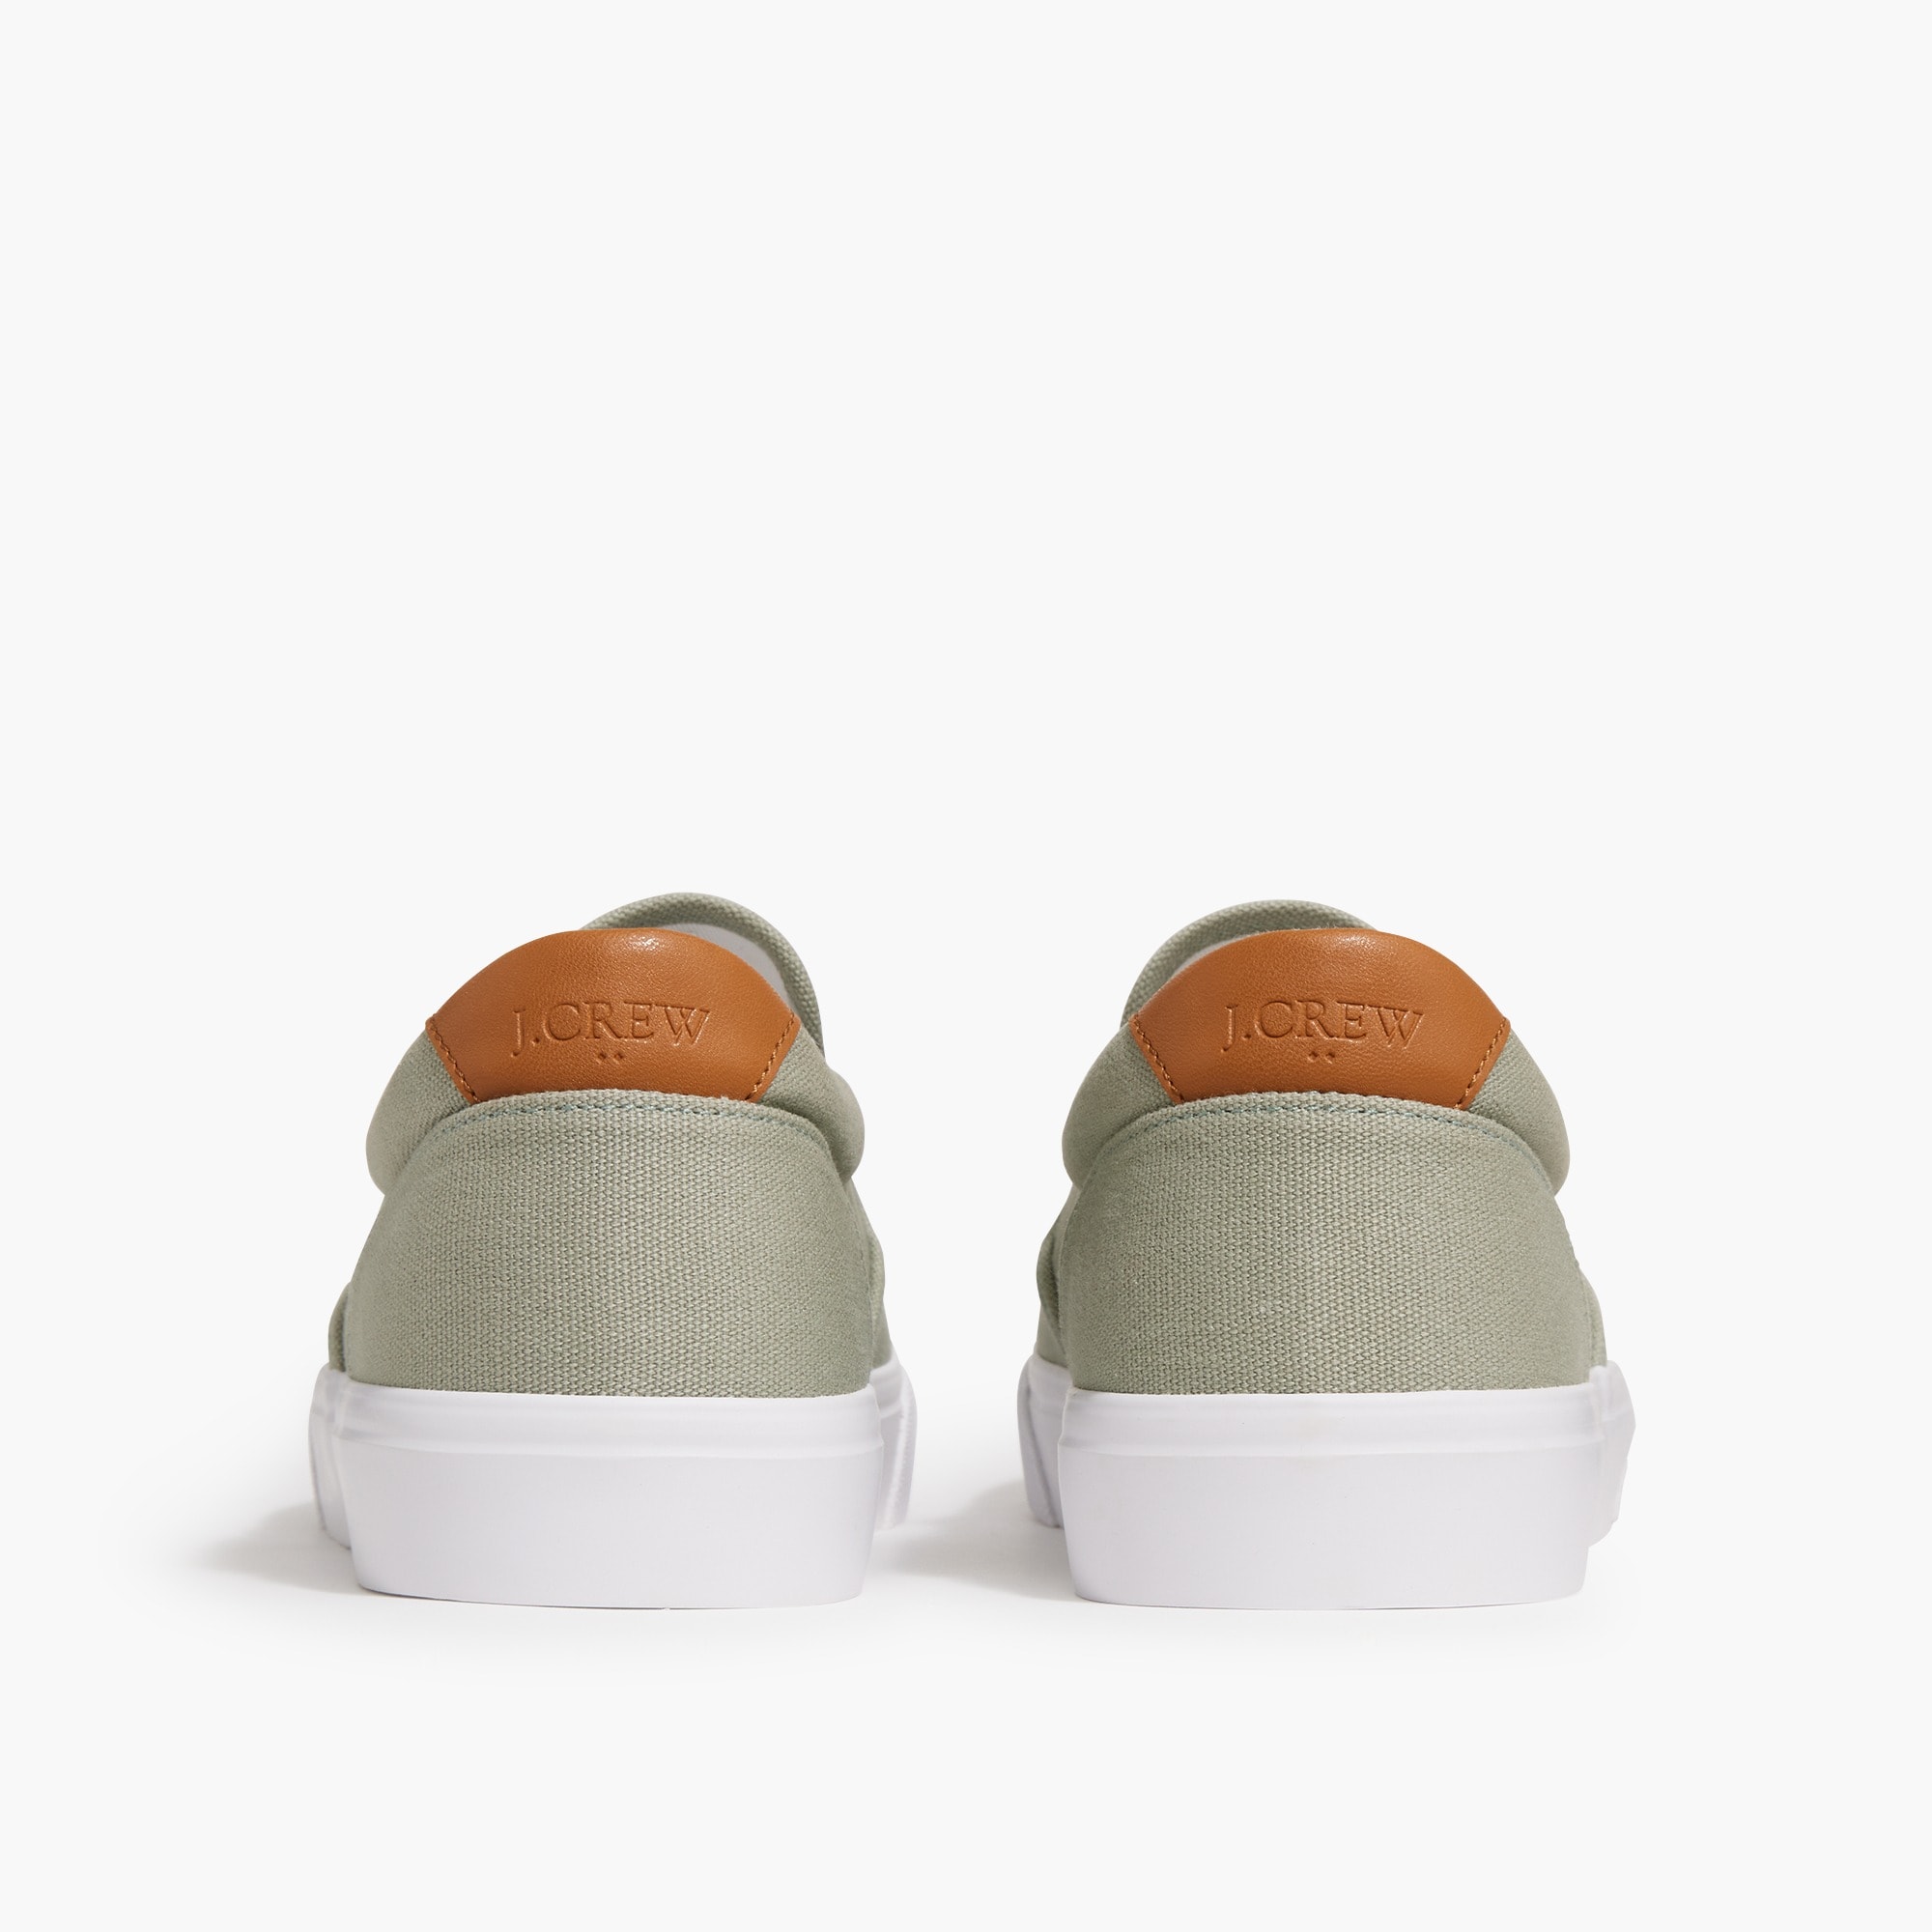 Canvas slip-on sneakers